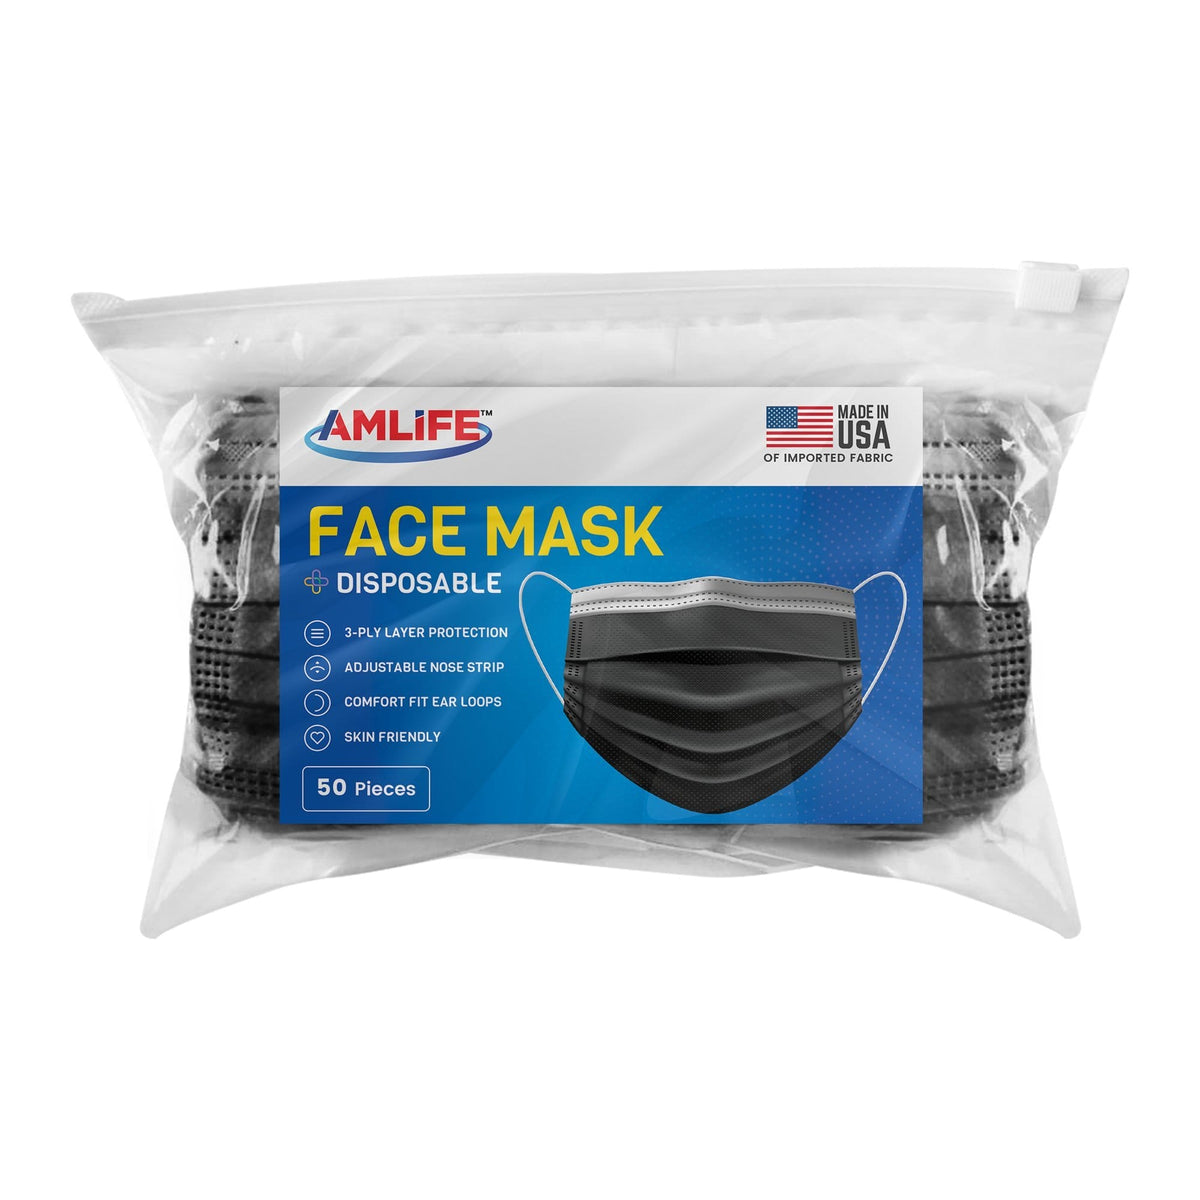 AMLIFE 50 Pack Black Face Masks 3-Ply Filter - Made in USA with Imported Fabric